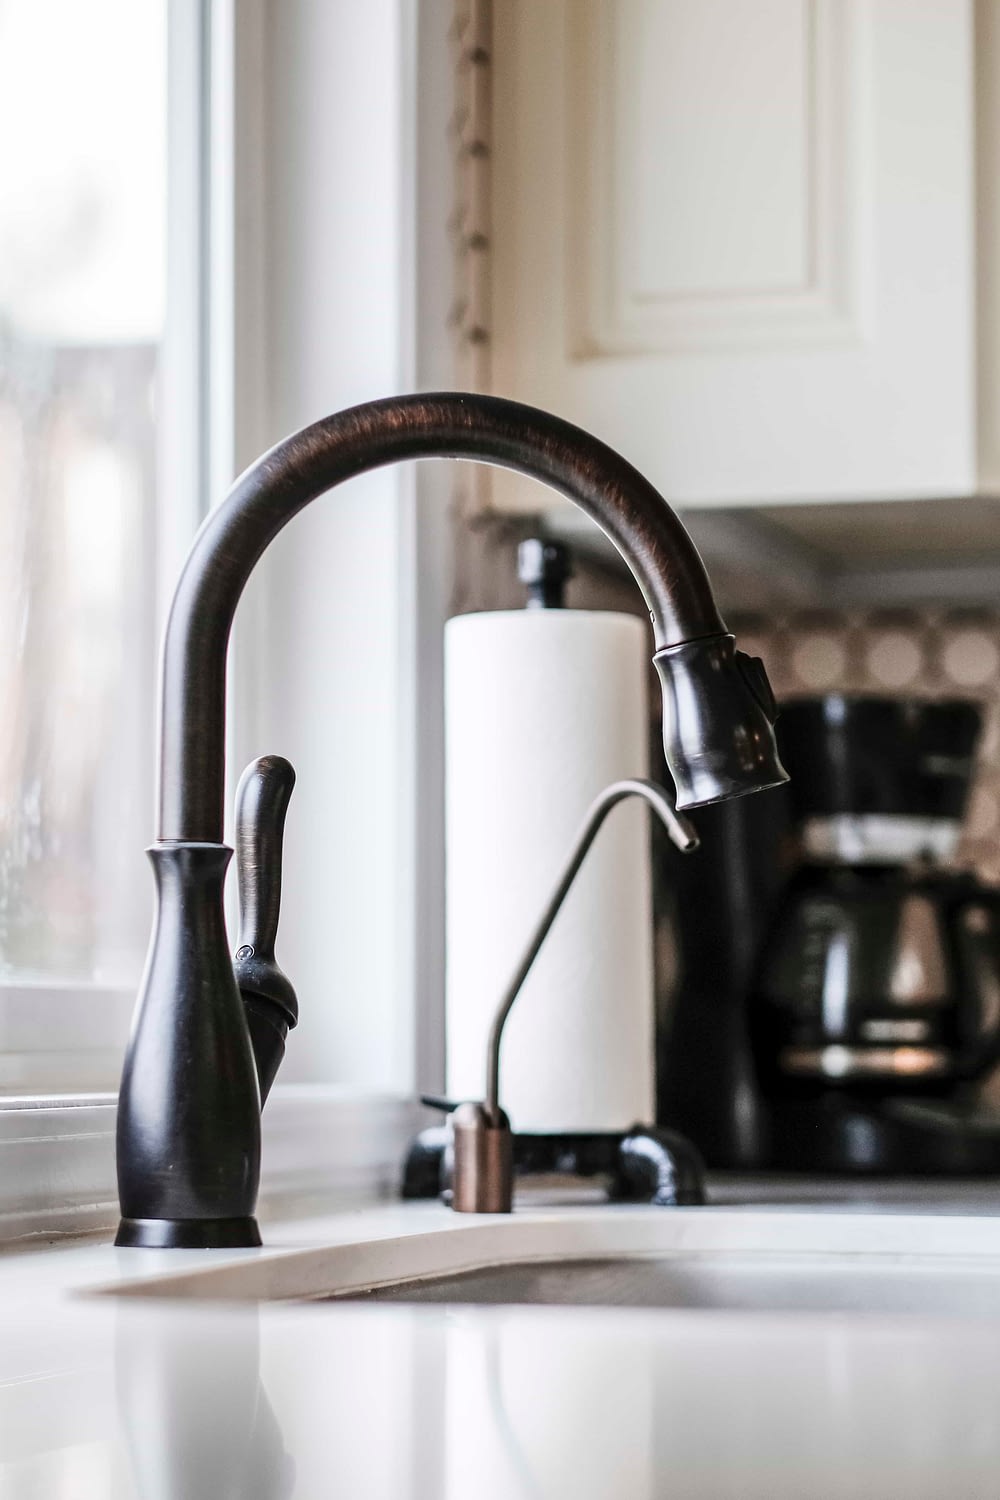 Oil rubbed bronze goose neck faucet installed over a farmhosue undermount sink